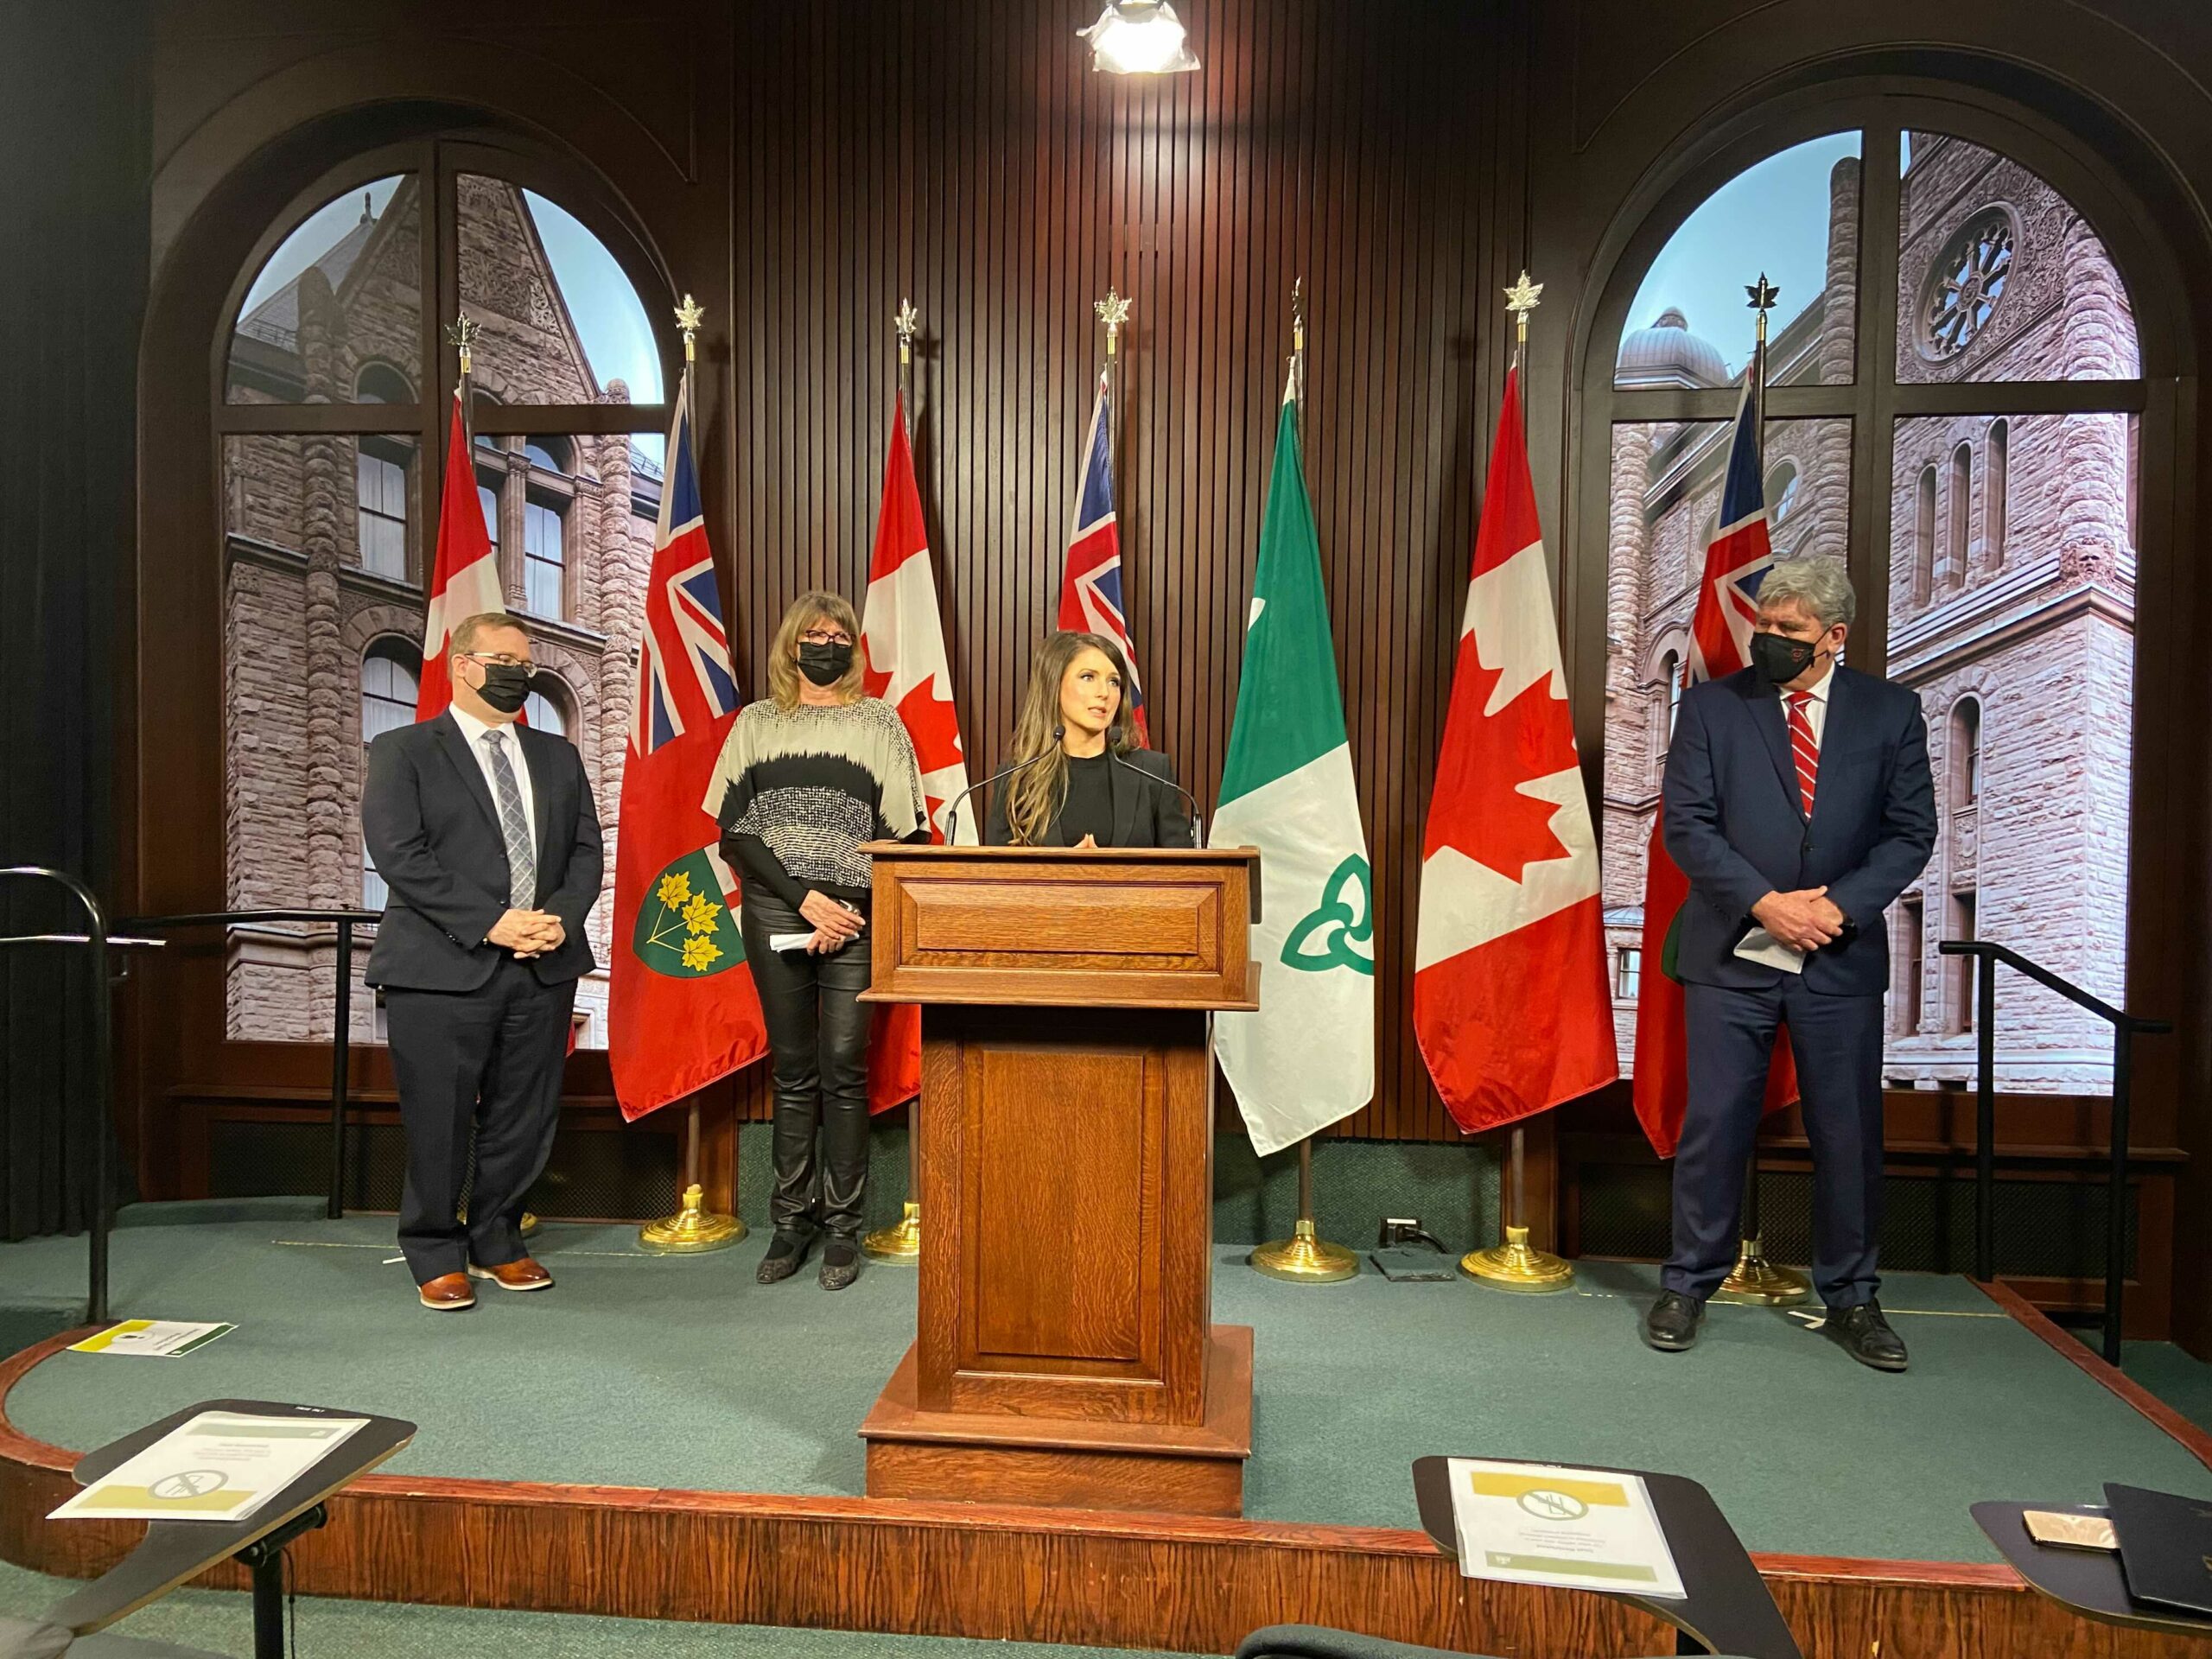 Opposition parties want Ontario to pay for Ottawa occupation